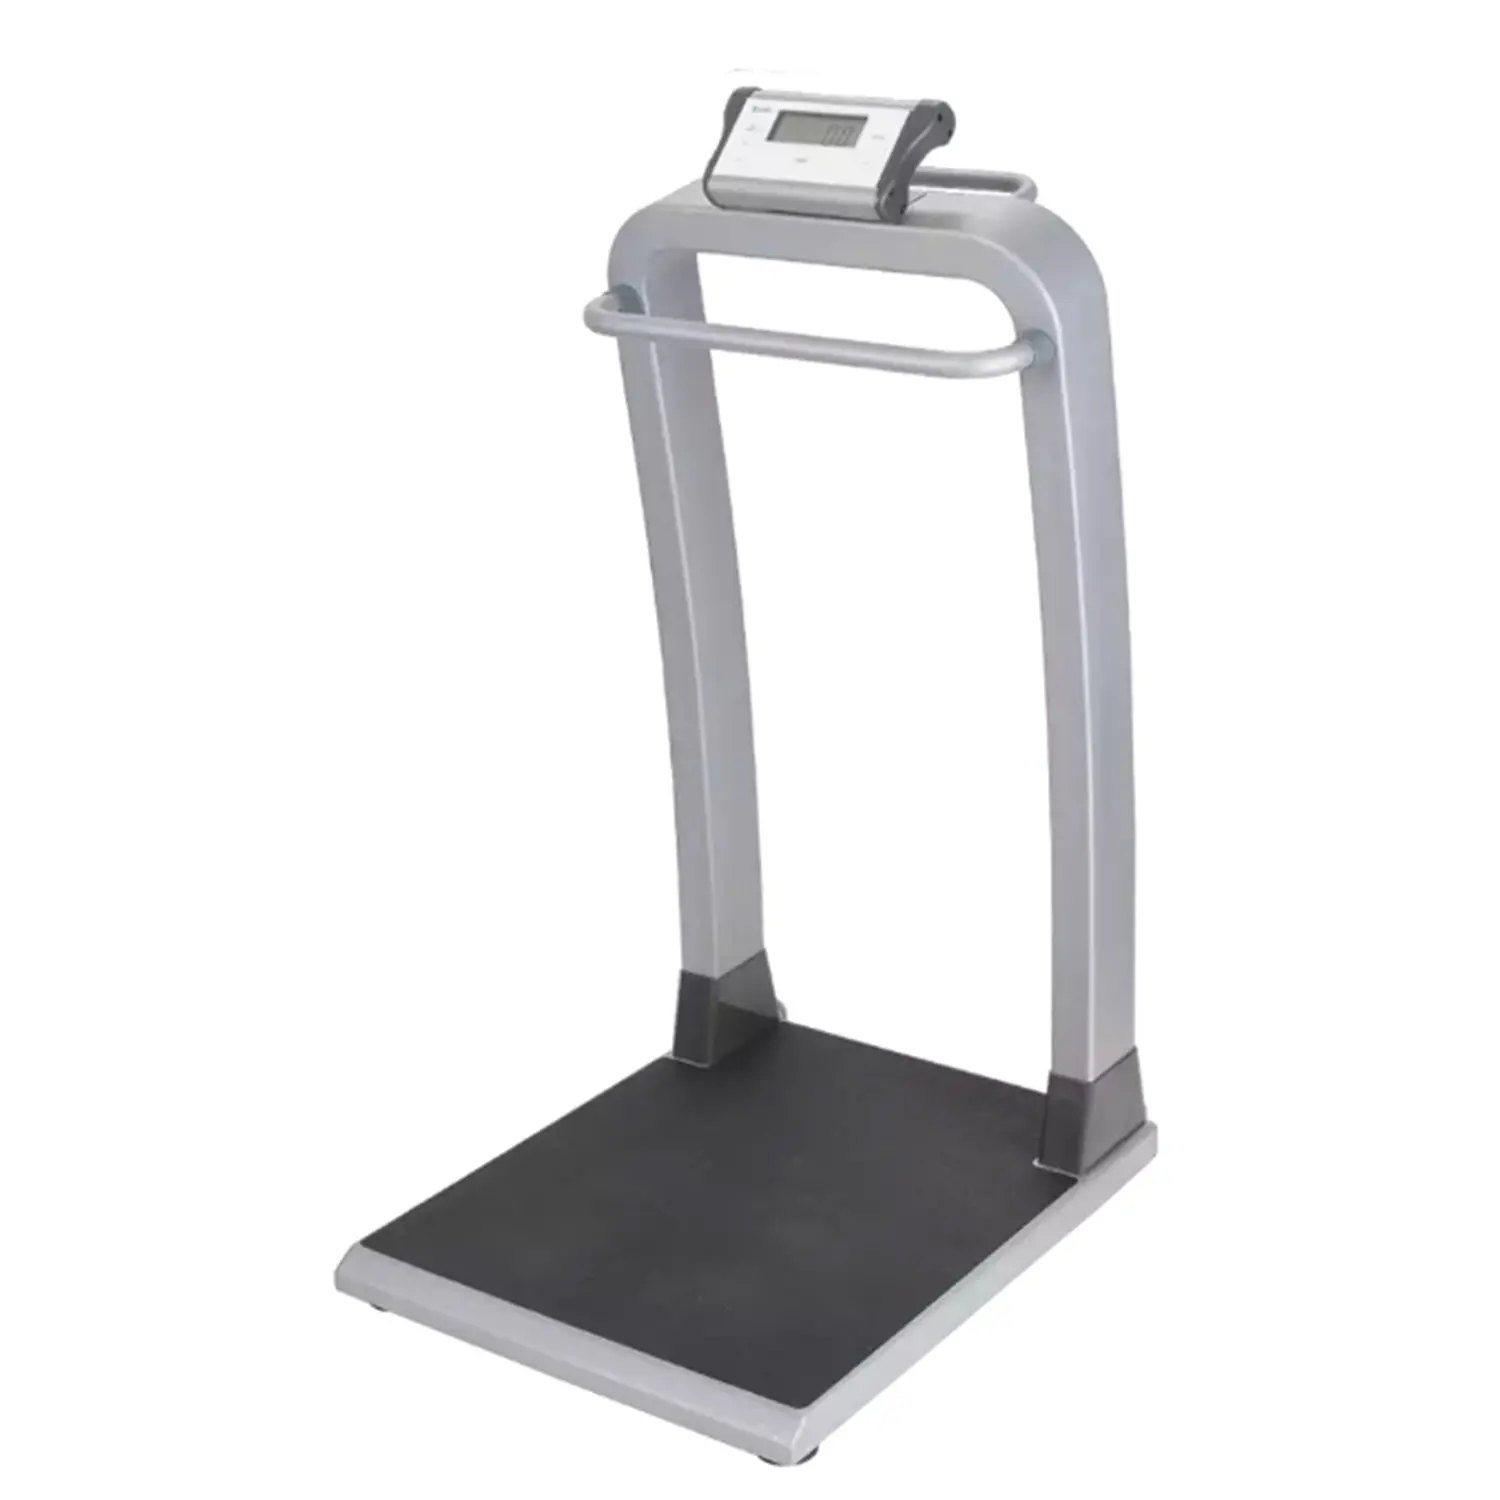 Doran DS7200 Handrail Scale Doran DS7200 Handrail Scale, Weight Control, Bariatrics, DS7200, 